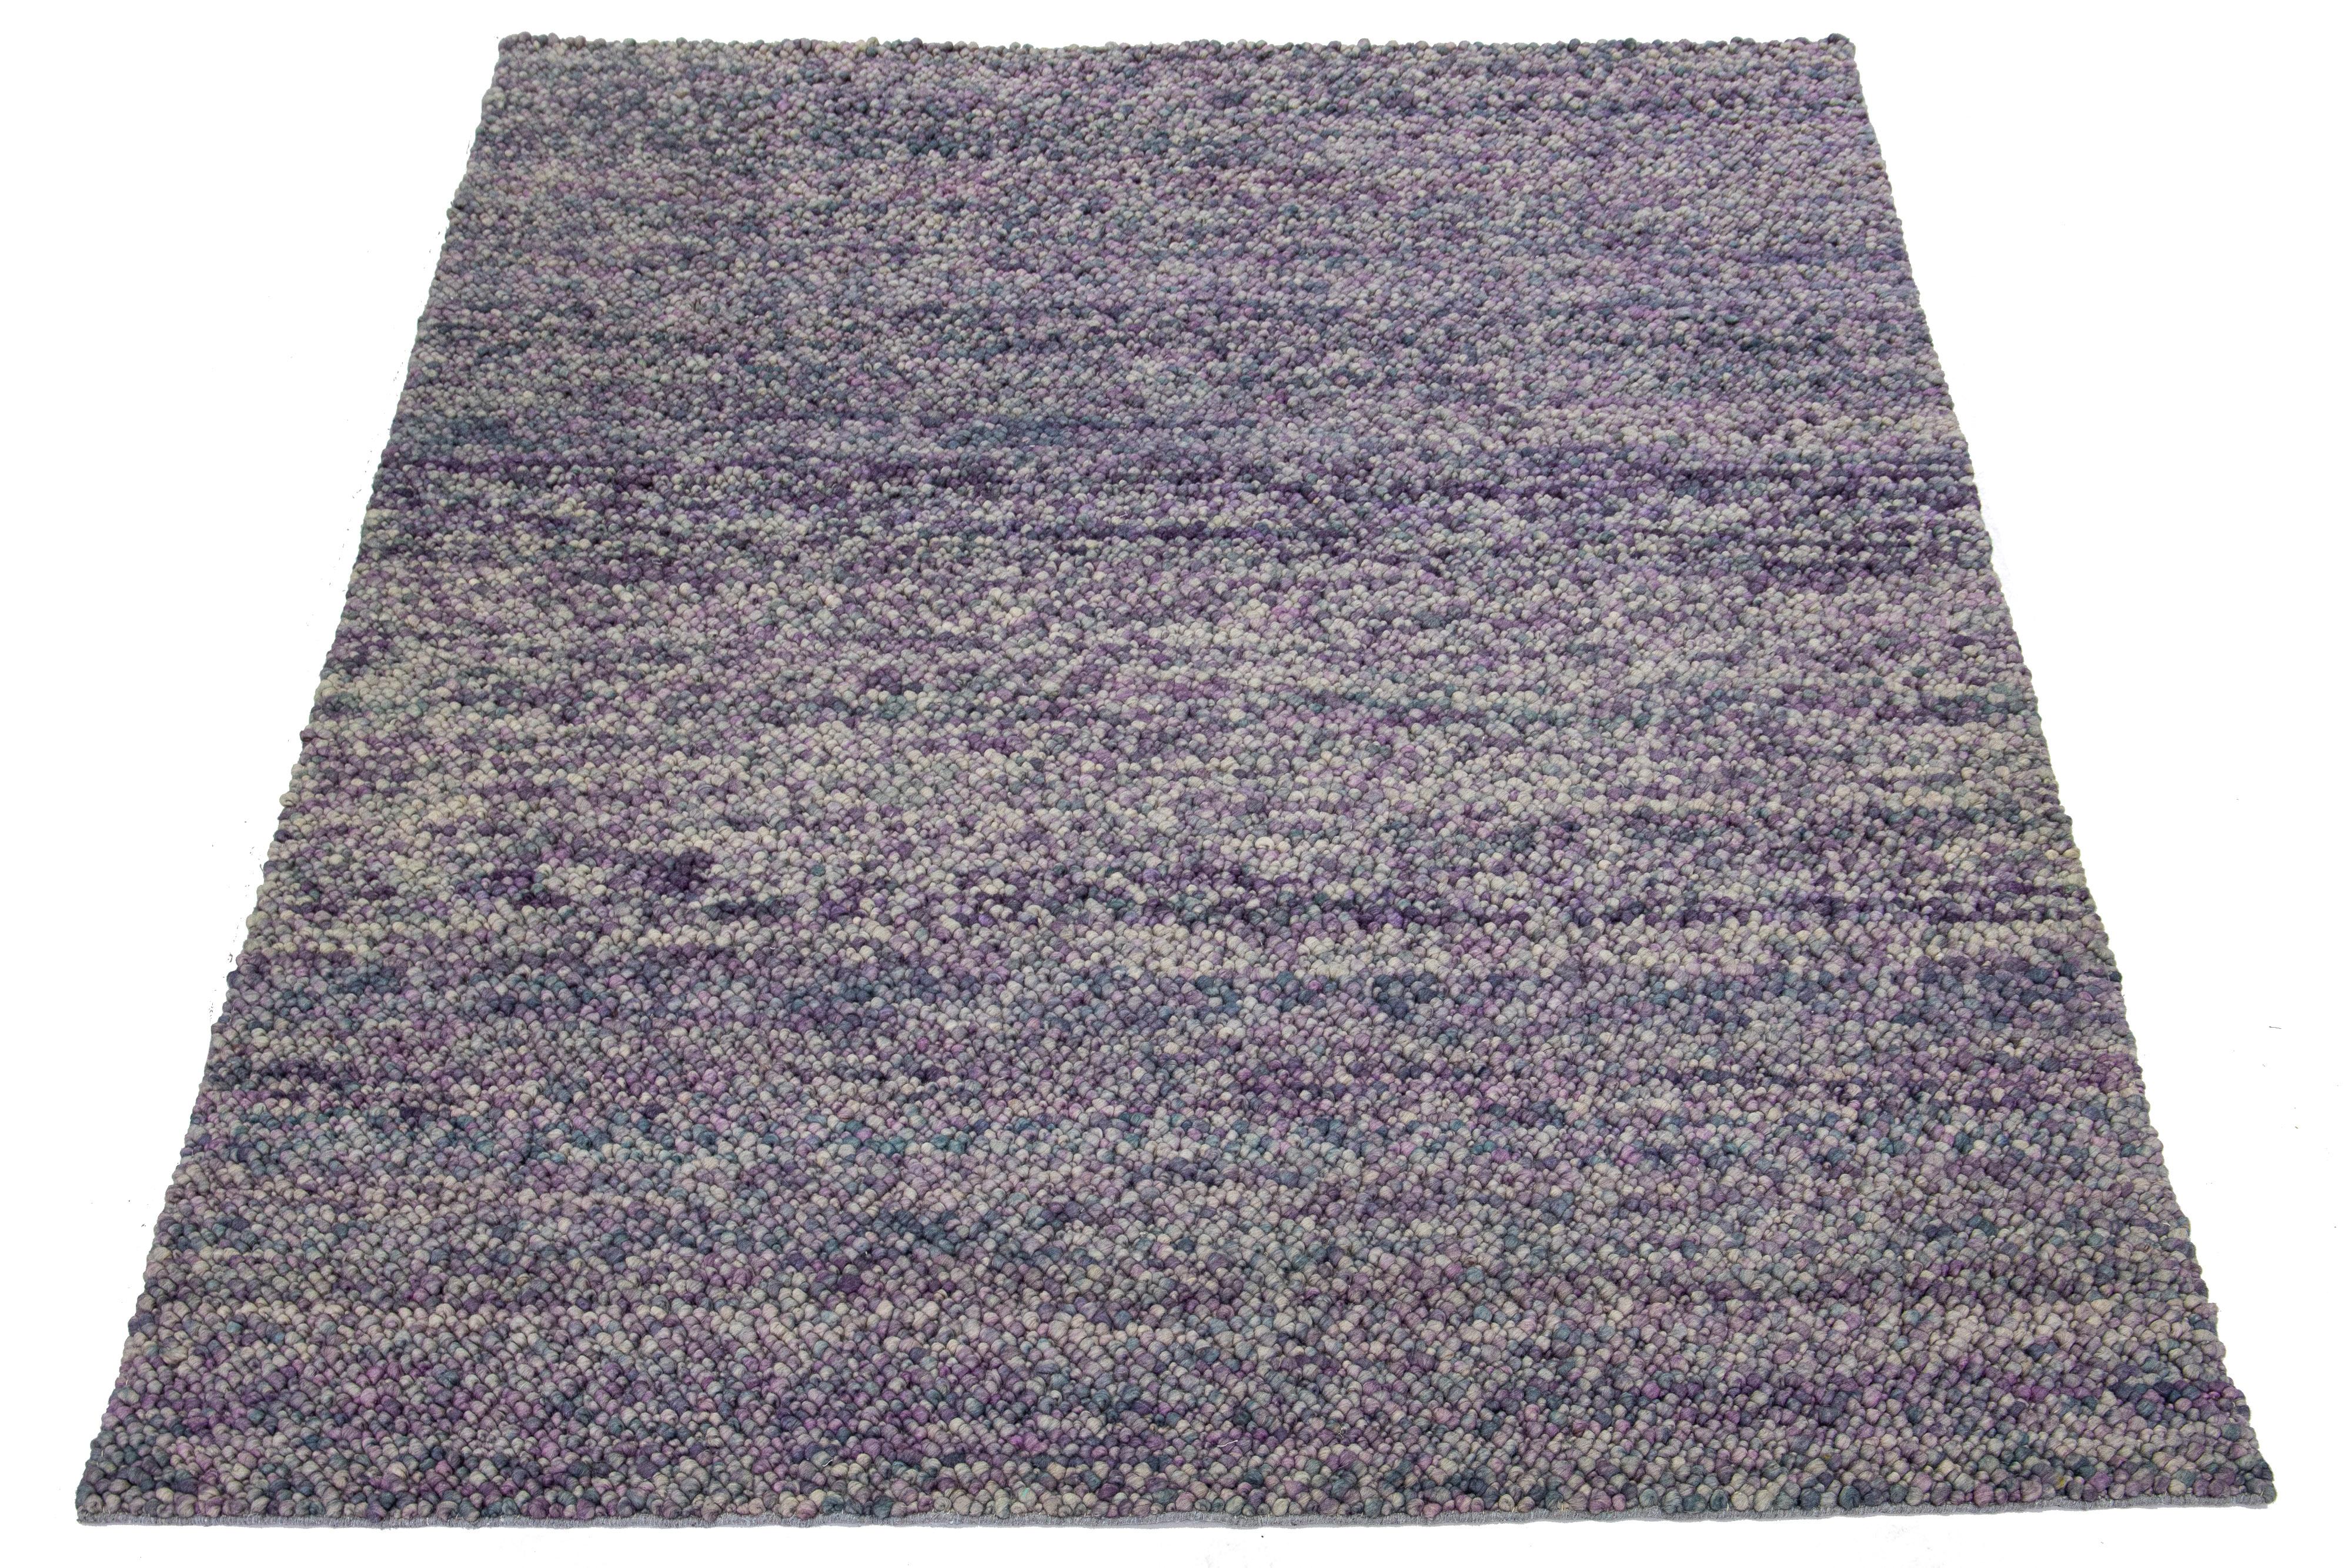 This beautiful, modern texture hand-knotted wool rug part of our Saco collection features a color field of purple, blue, and gray. The rug also boasts a stunning textured abstract design resembling pebbles.

This rug measures 8' x 11'.

Our rugs are